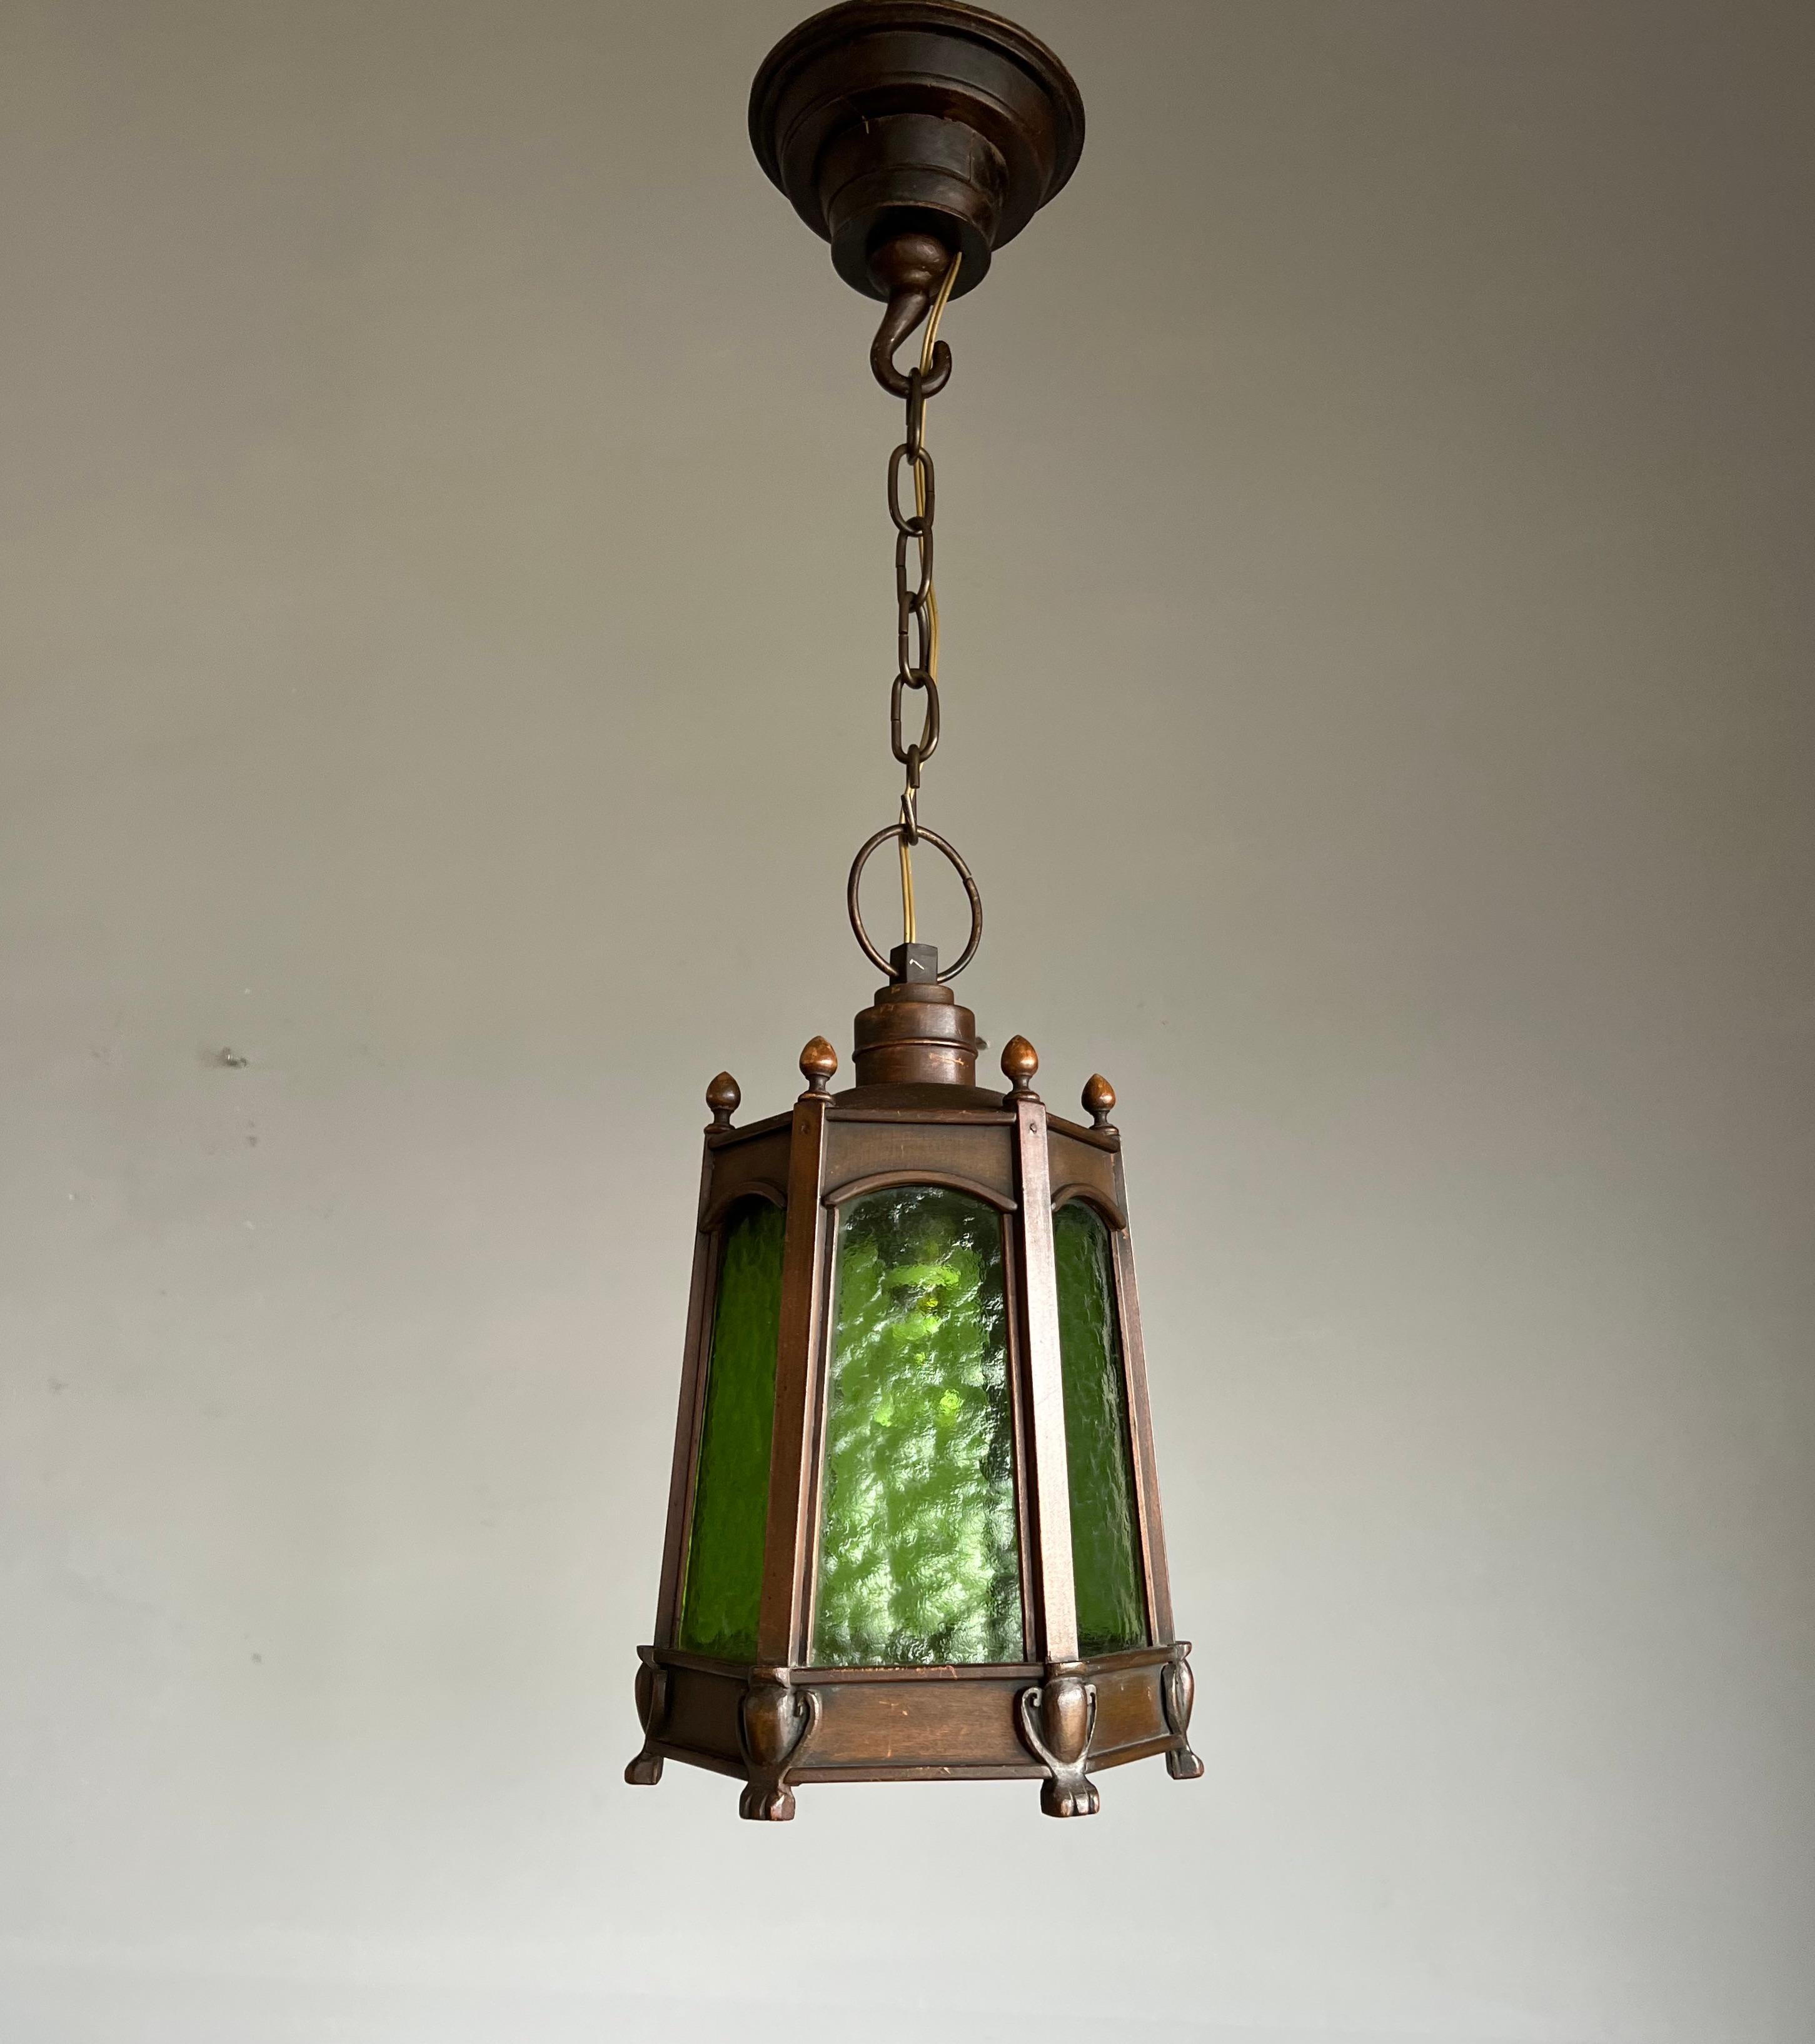 Mint condition, perfectly geometrical and all handmade Arts and Crafts lantern, ceiling light.

Finding rare or unique light fixtures always makes our day and when we came across this handcrafted wooden pendant we were immediately 'sold'. The calm